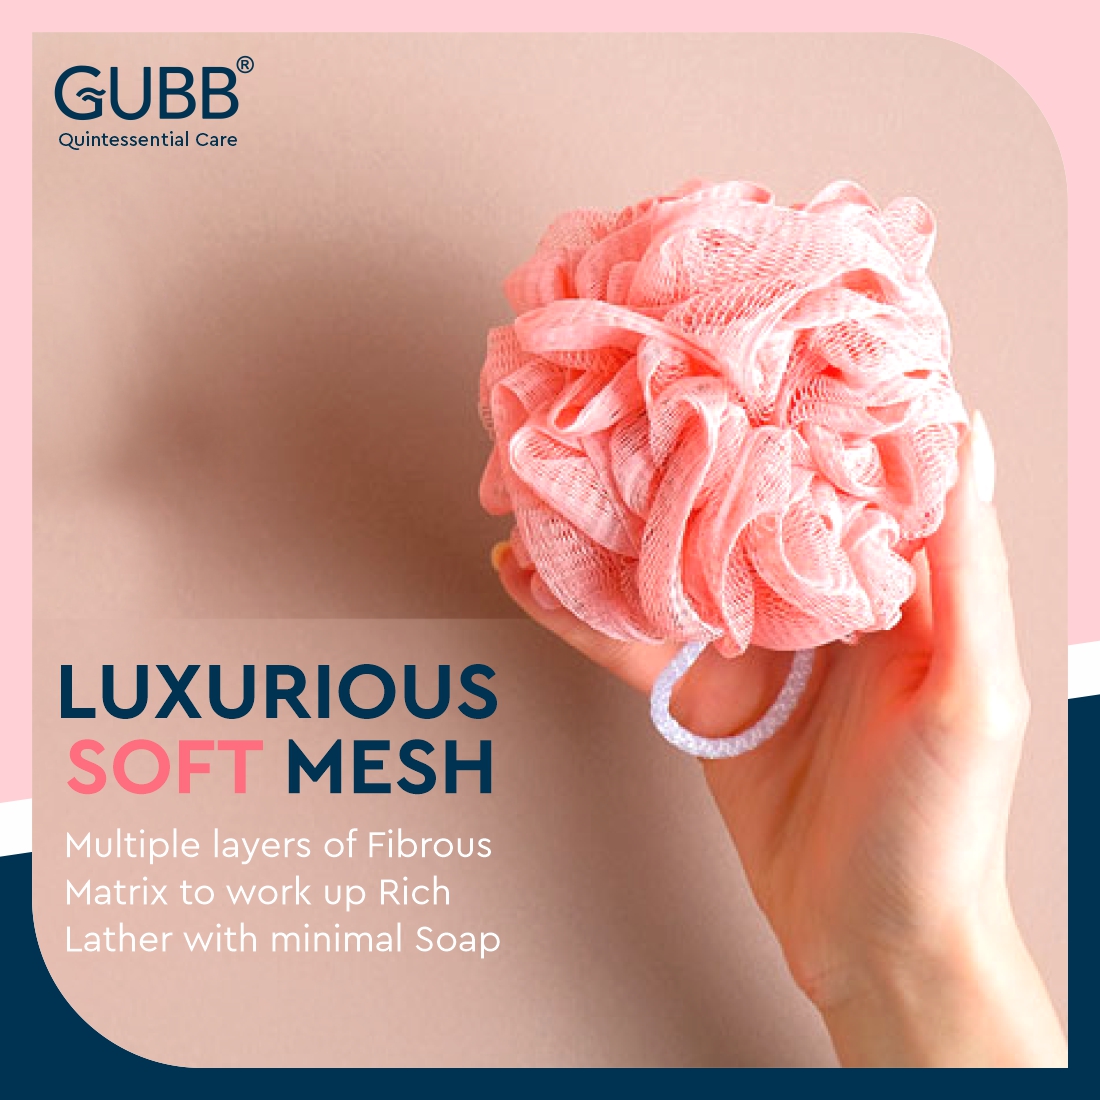 Luxe Bath Sponge Round Loofah - Coral & Lilac